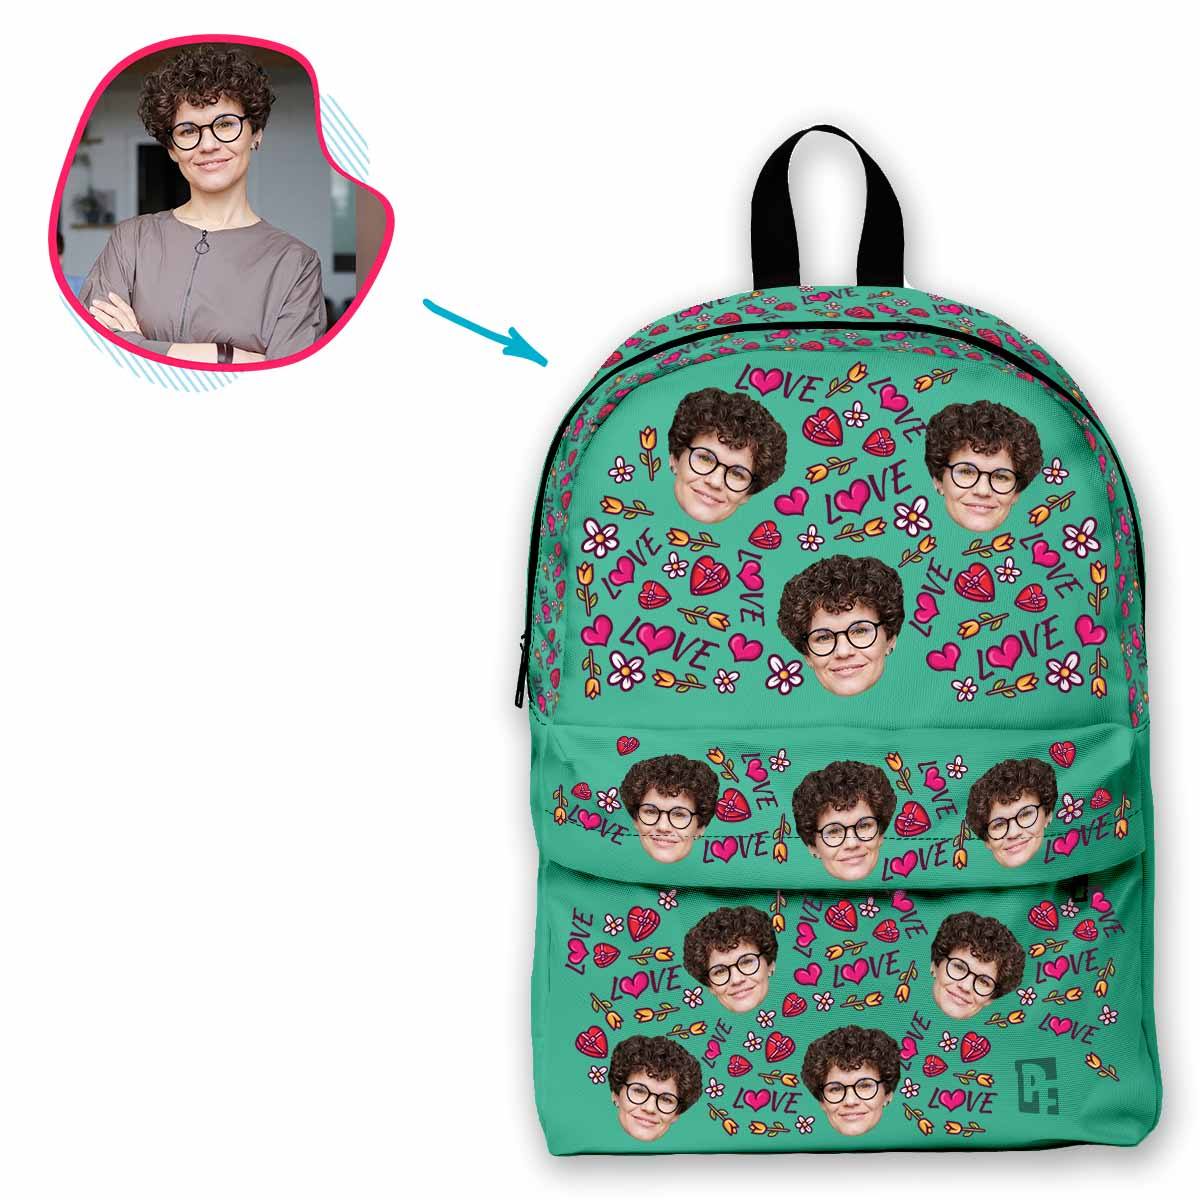 mint Hearts and Flowers classic backpack personalized with photo of face printed on it